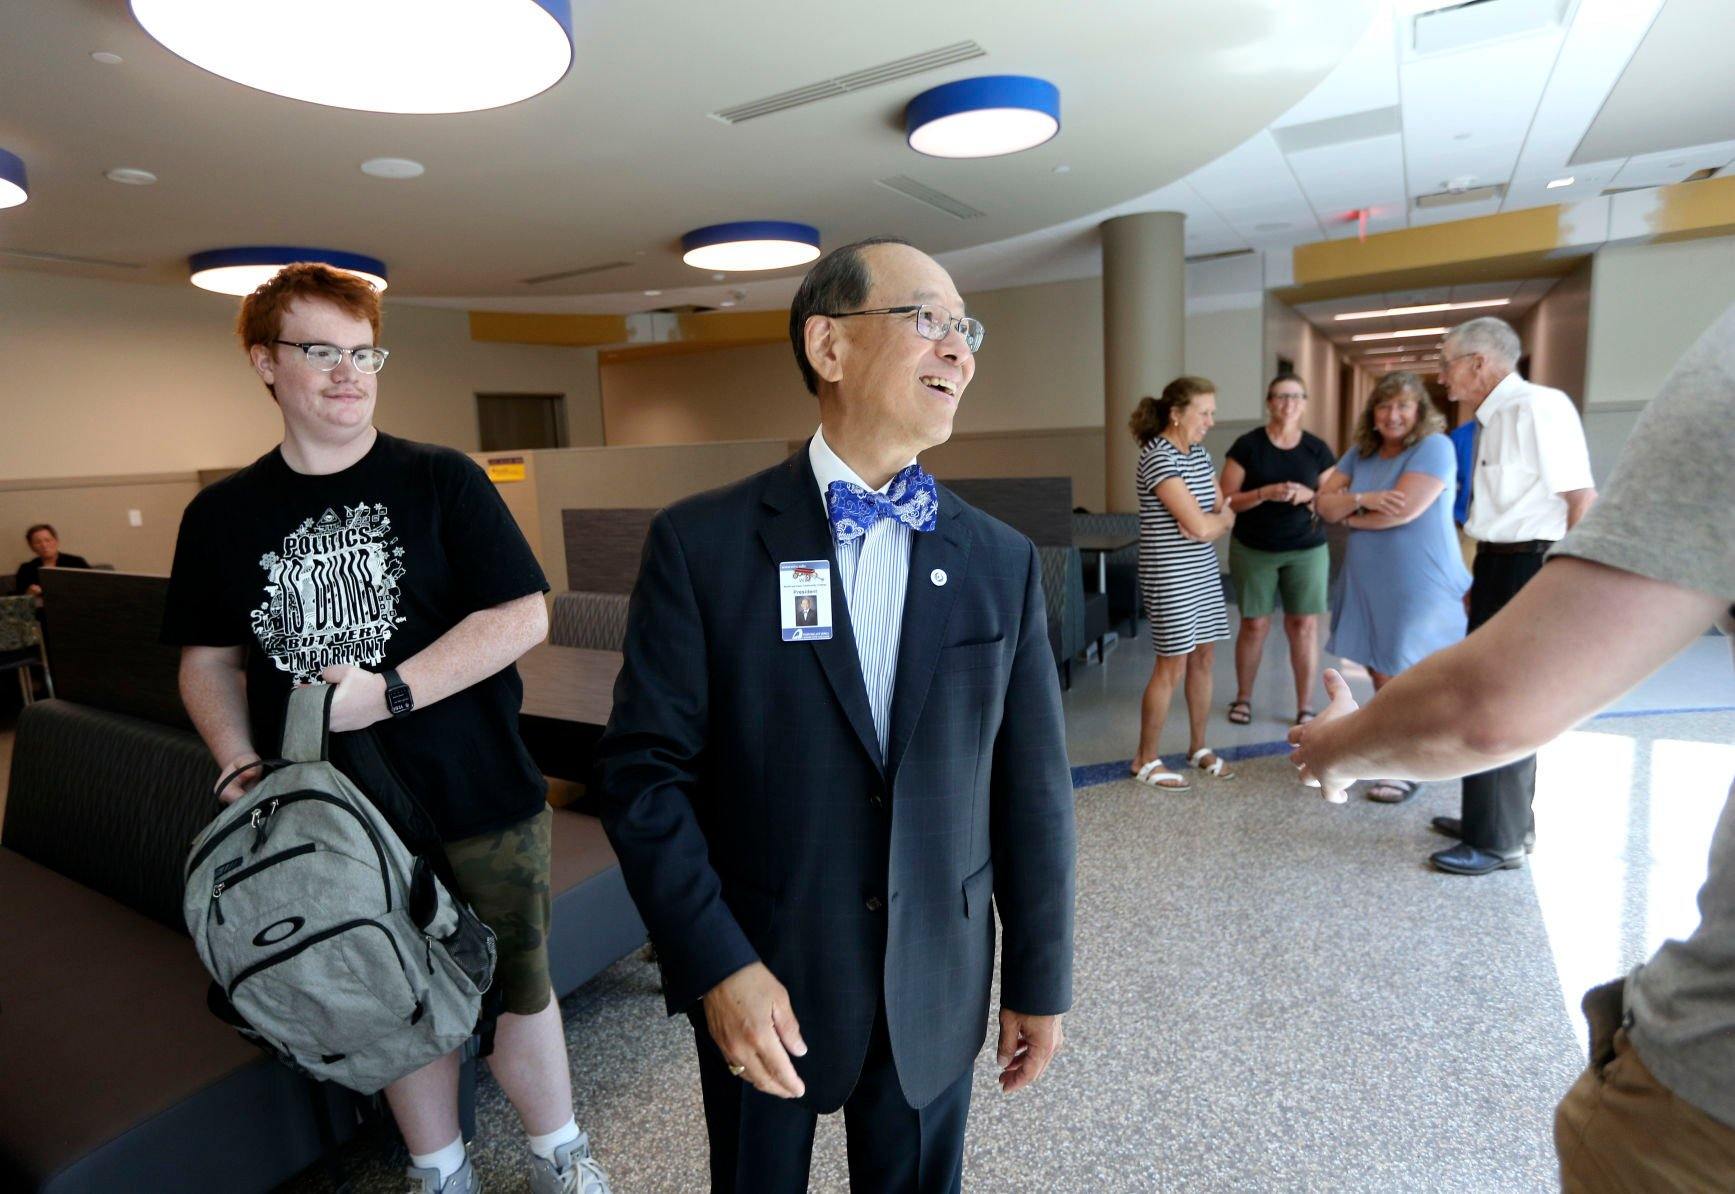 Departing Northeast Iowa Community College President Liang Chee Wee chats with students during his goodbye ceremony held at the Peosta campus on, Wednesday, June 22, 2022.    PHOTO CREDIT: Dave Kettering